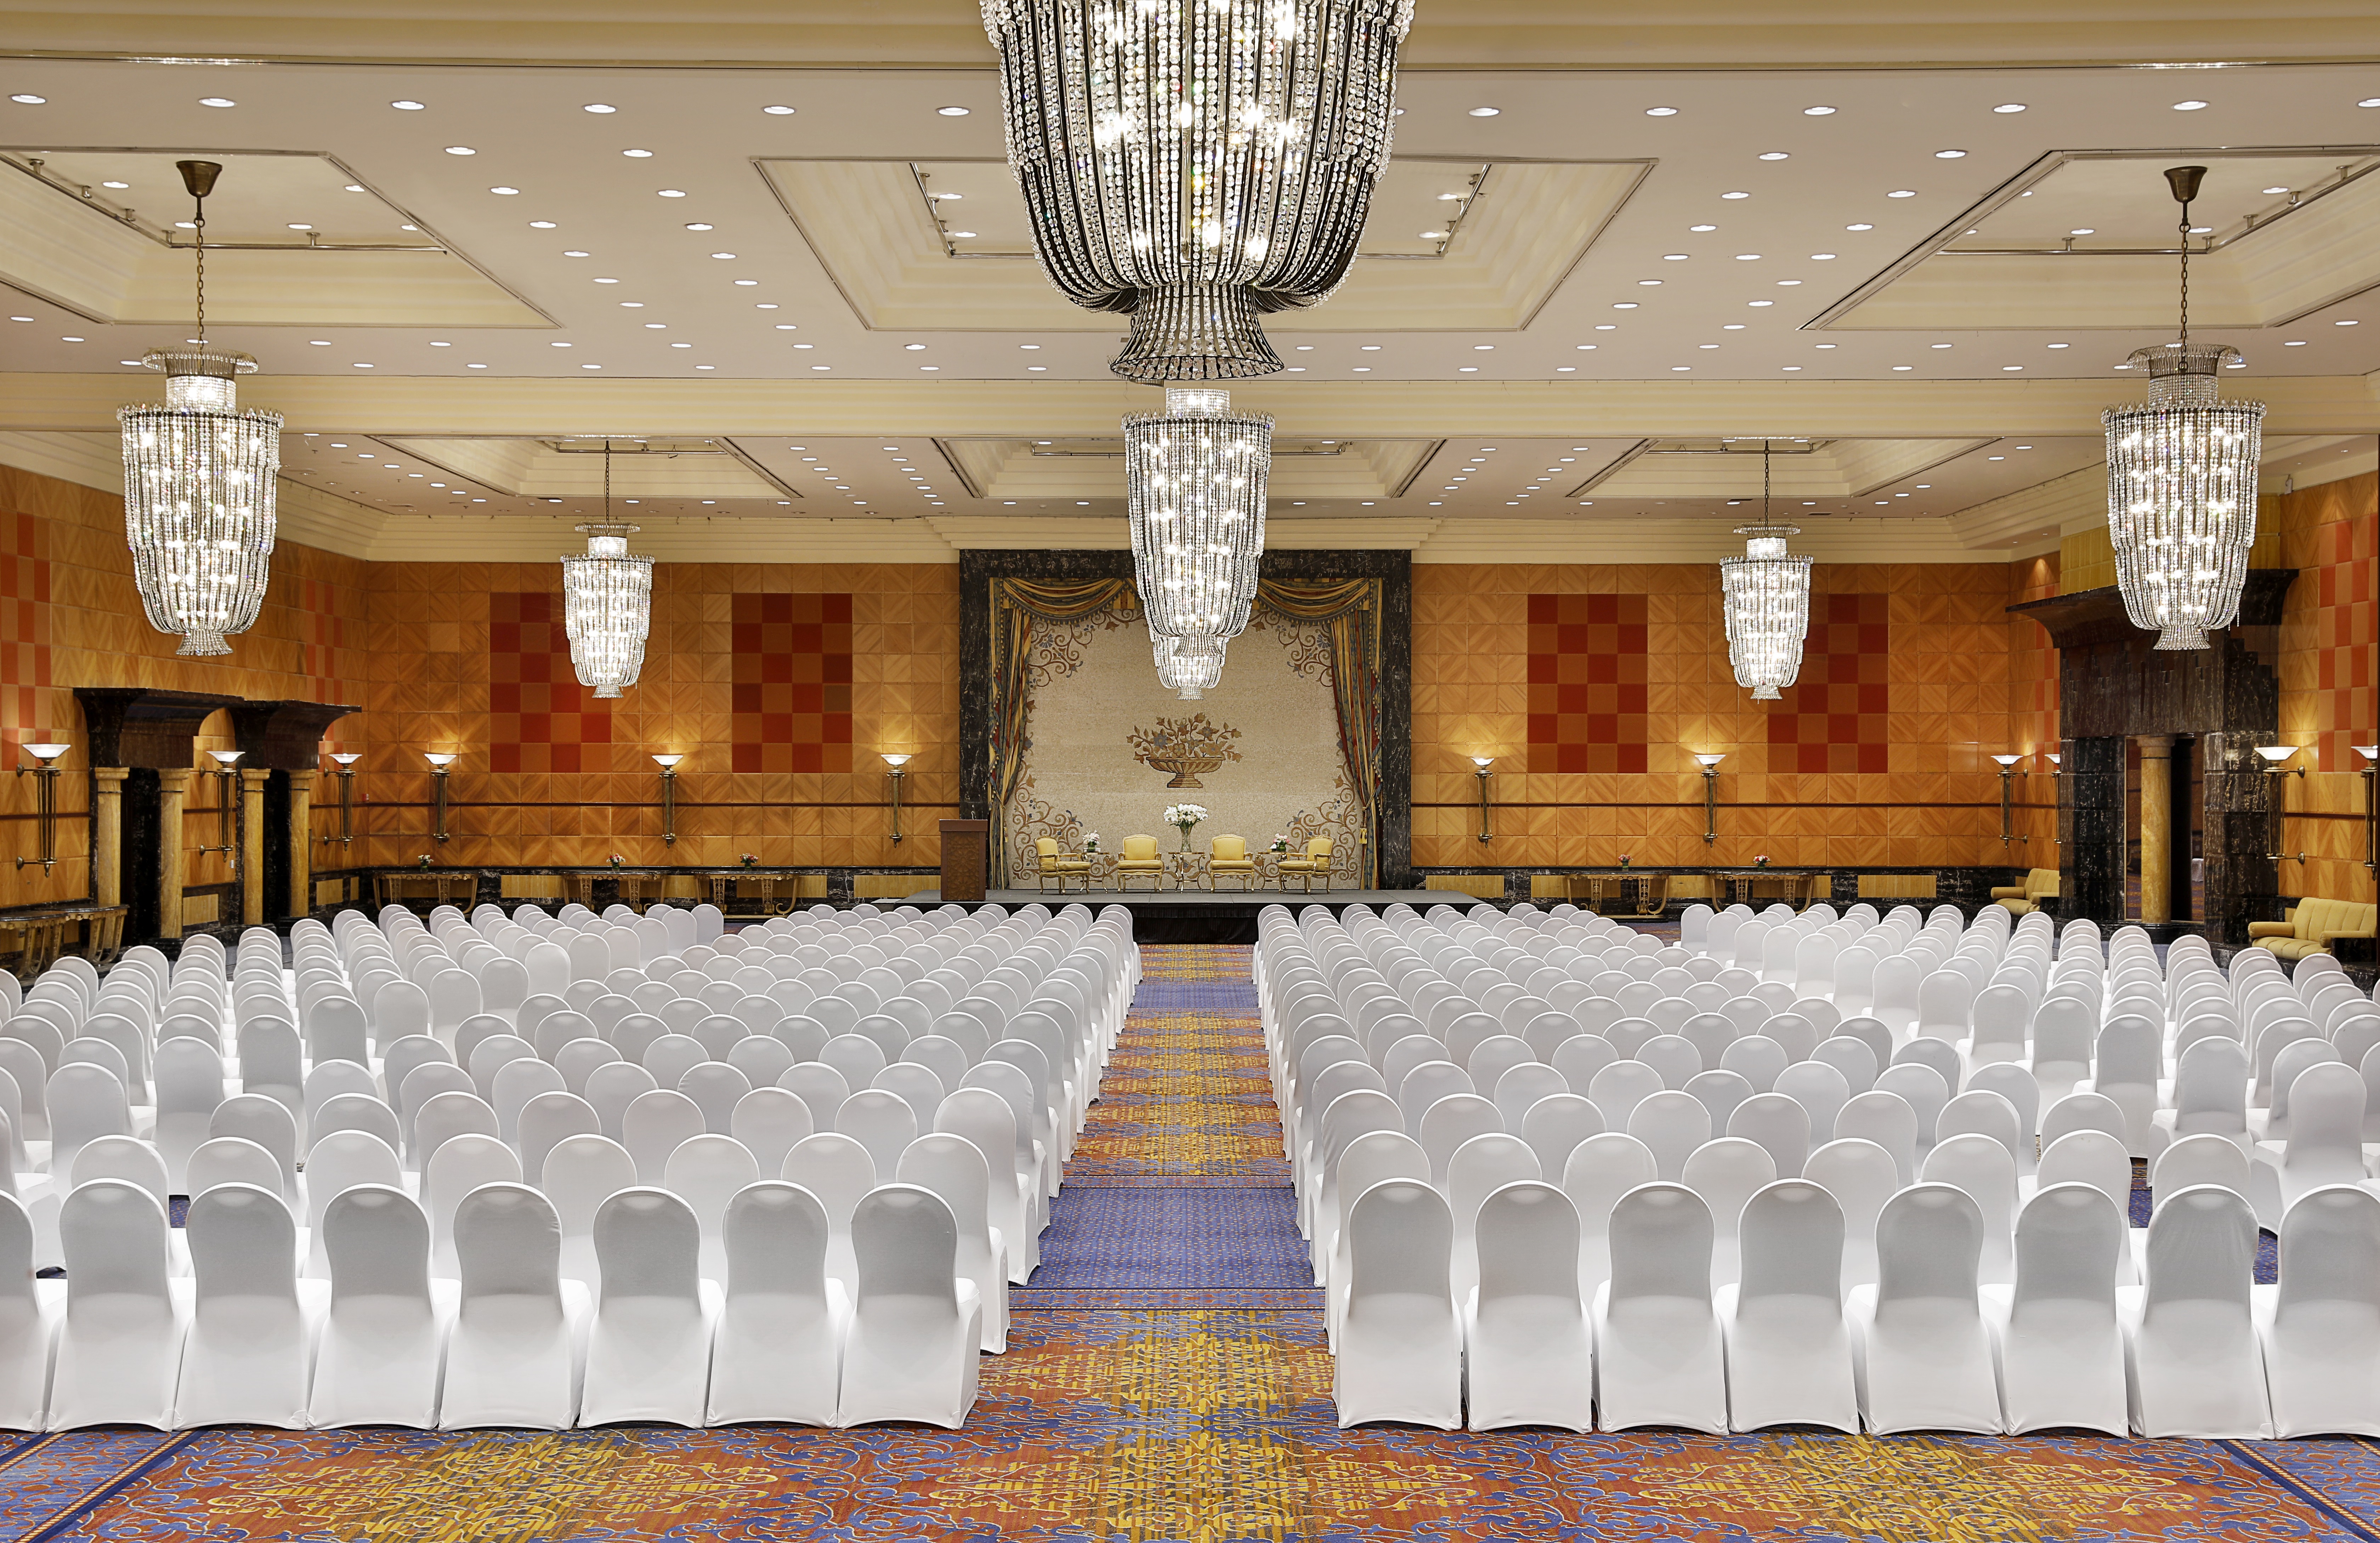 Rows of Chairs Set Up in Ballroom